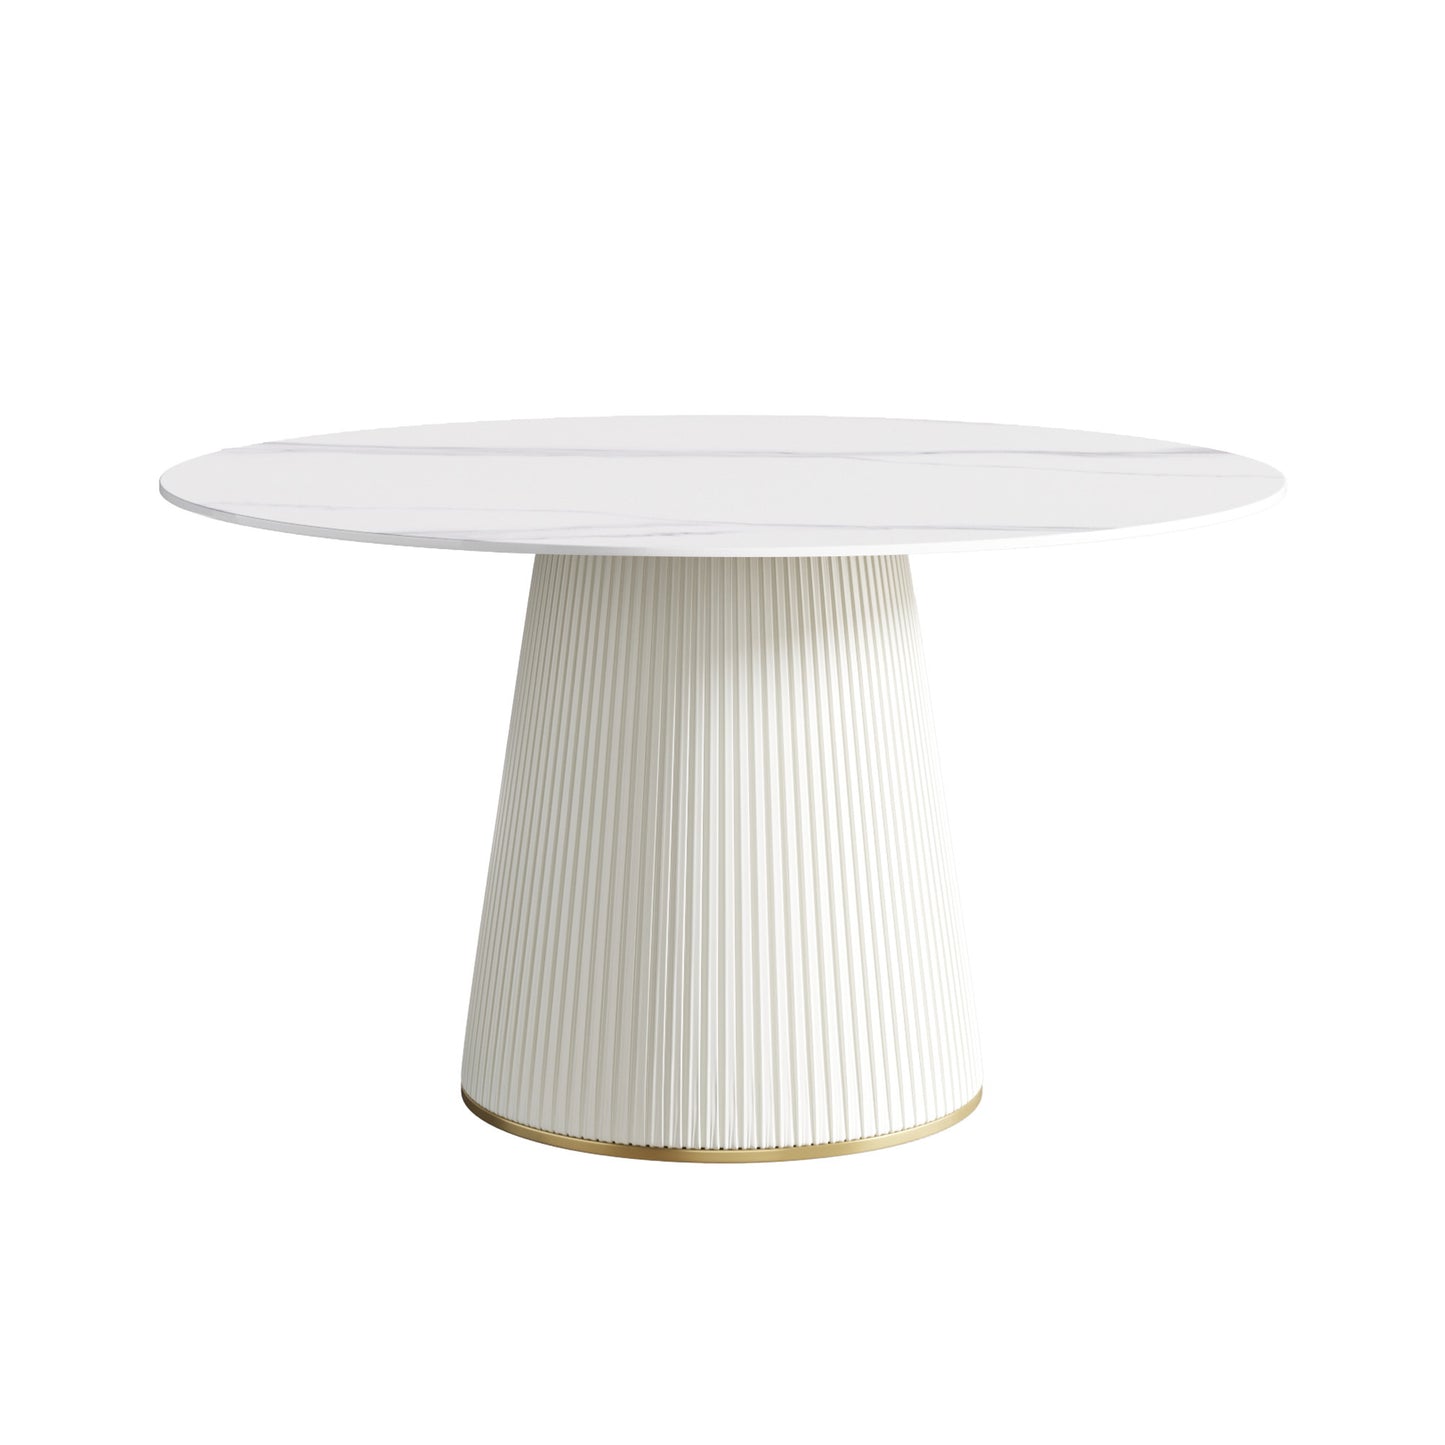 1st Choice Elevate Your Dining Experience with Our White Sintered Stone Table